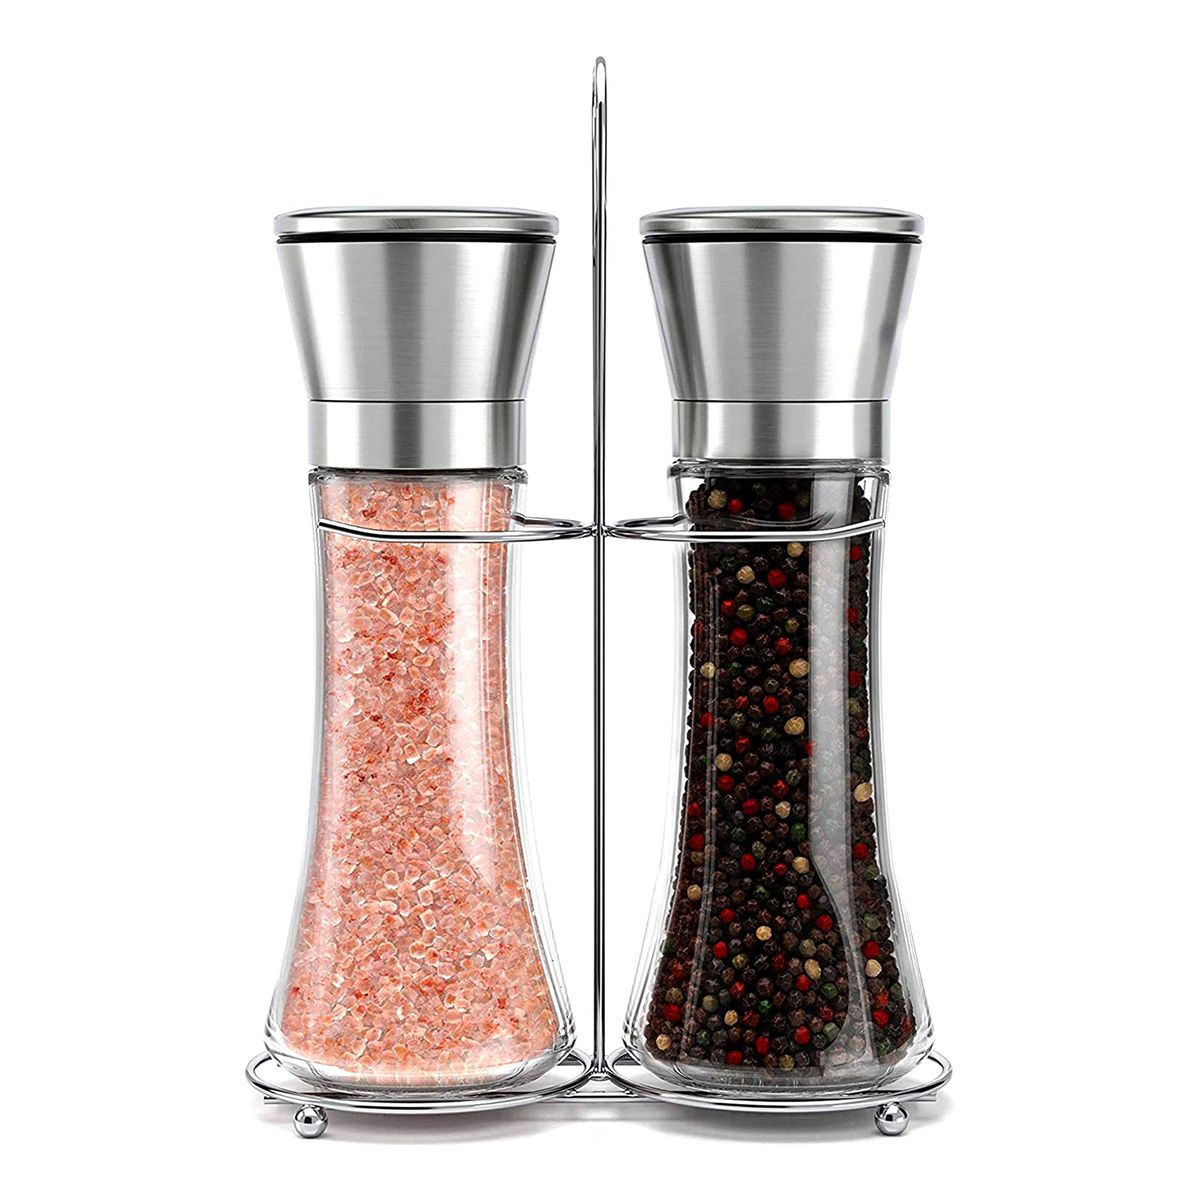 2 pcs Glass Body Set of Salt and Pepper Grinders with Easy Adjustable Ceramic Coarseness Brozen Painting Stainless Steel Salt and Pepper Mills with Silicone Stand Pepper Grinder 